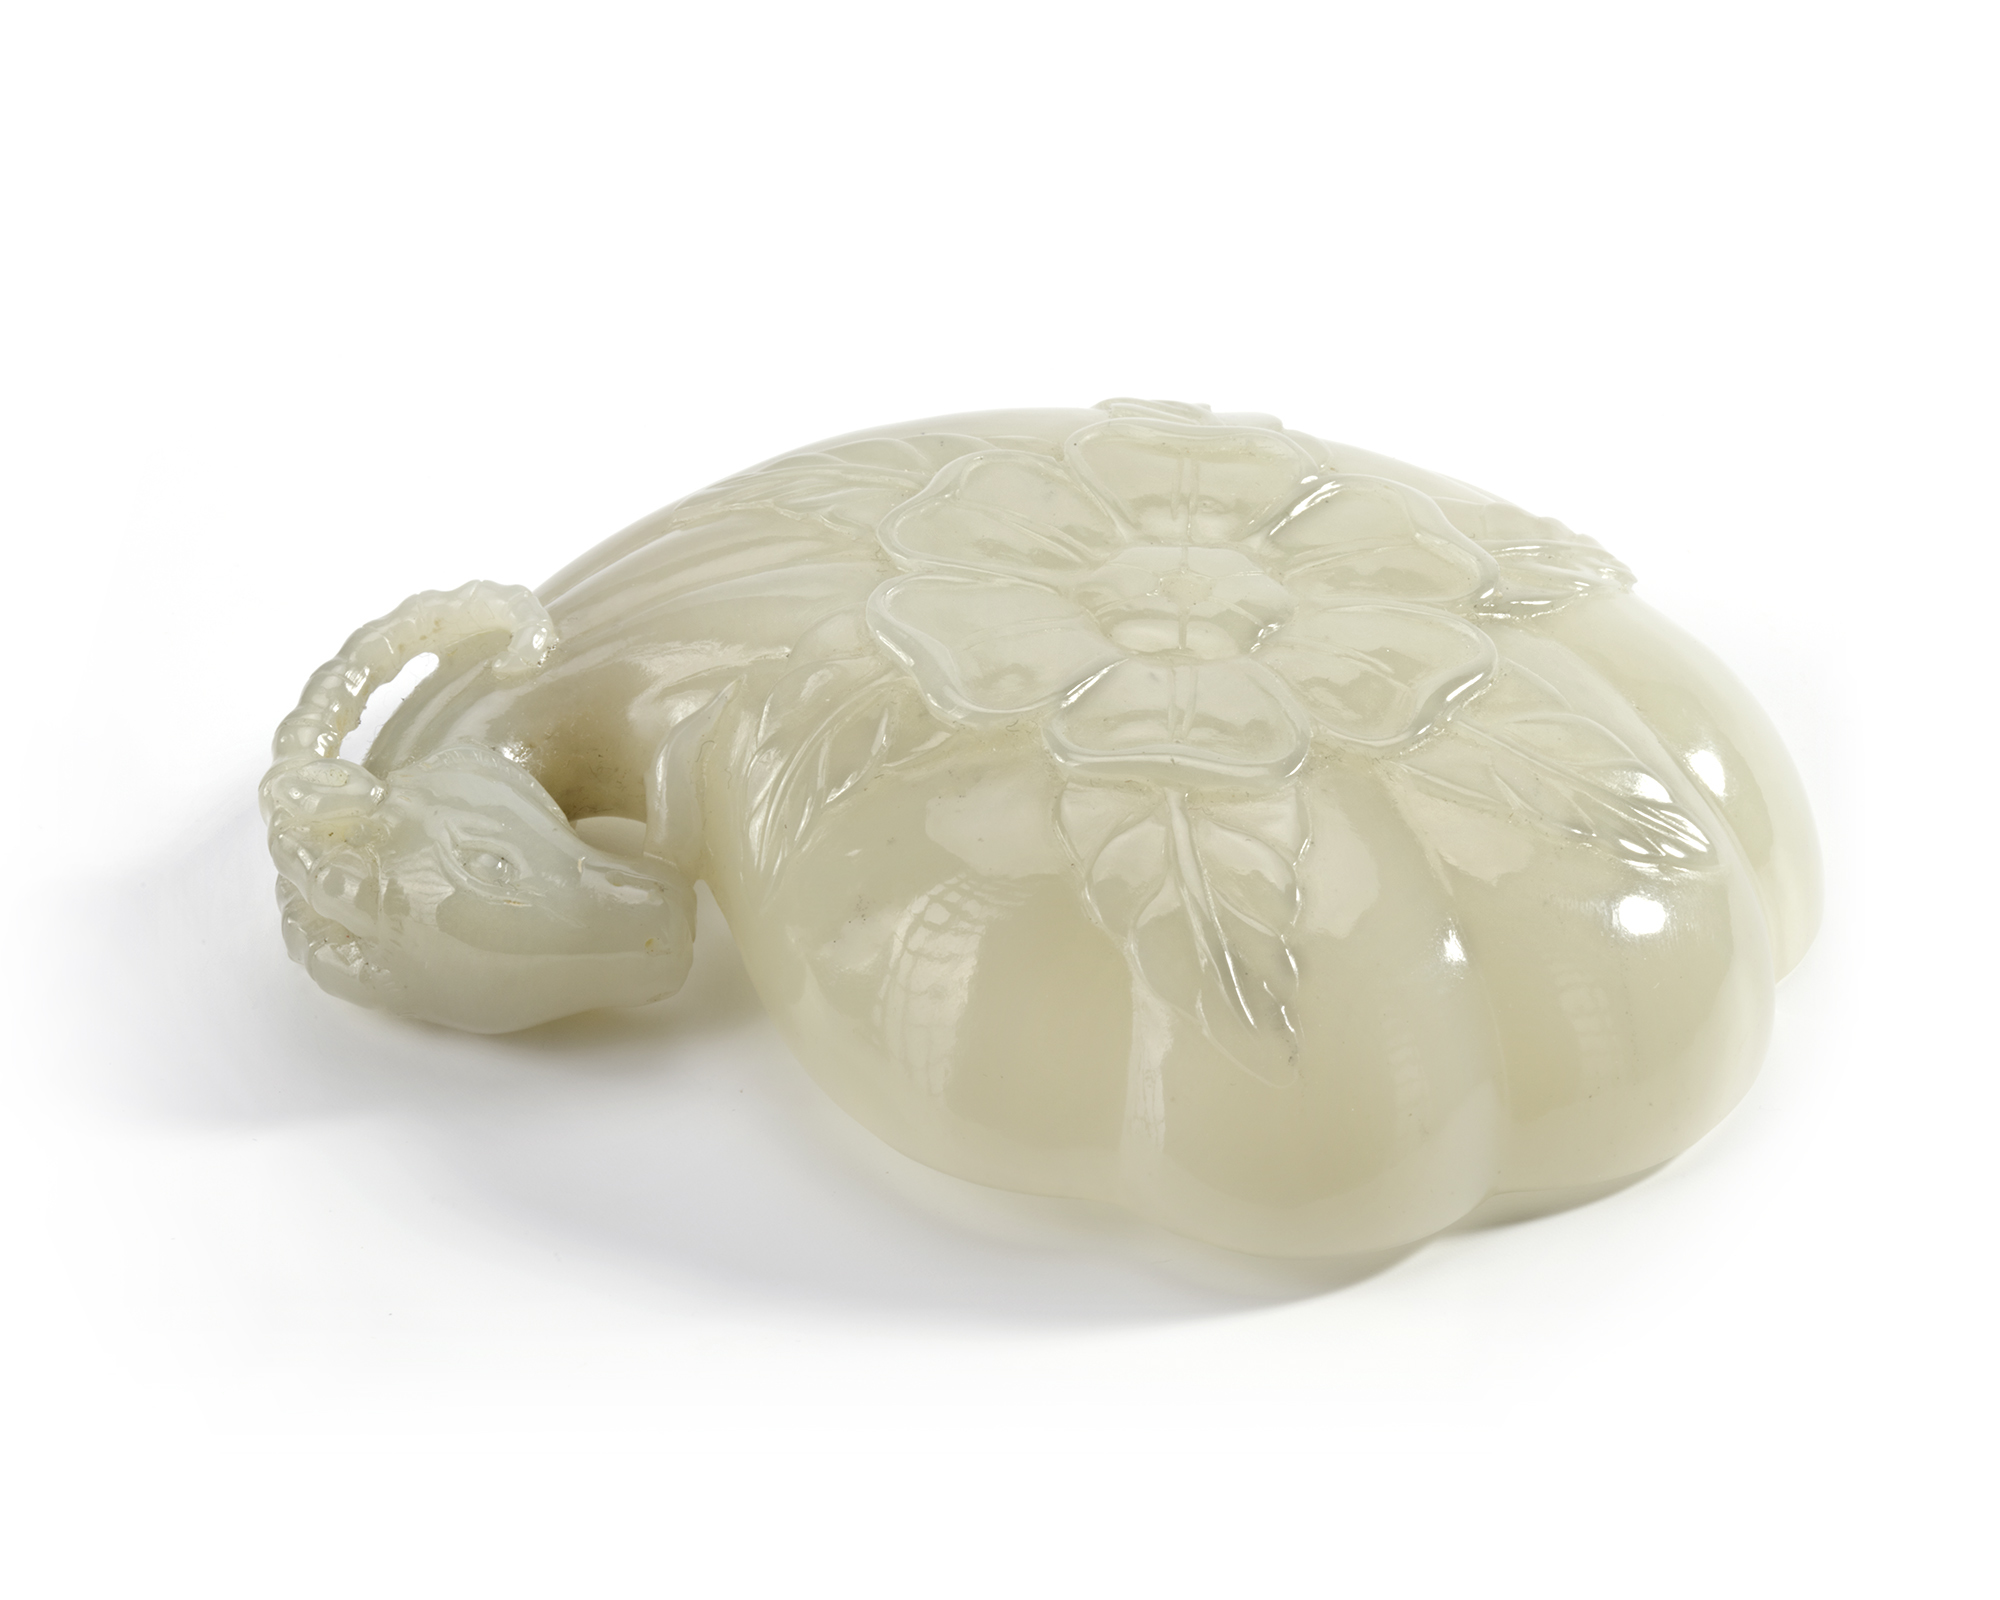 A MUGHAL-STYLE CARVED JADE RAMS CUP, 18TH CENTURY - Image 20 of 20